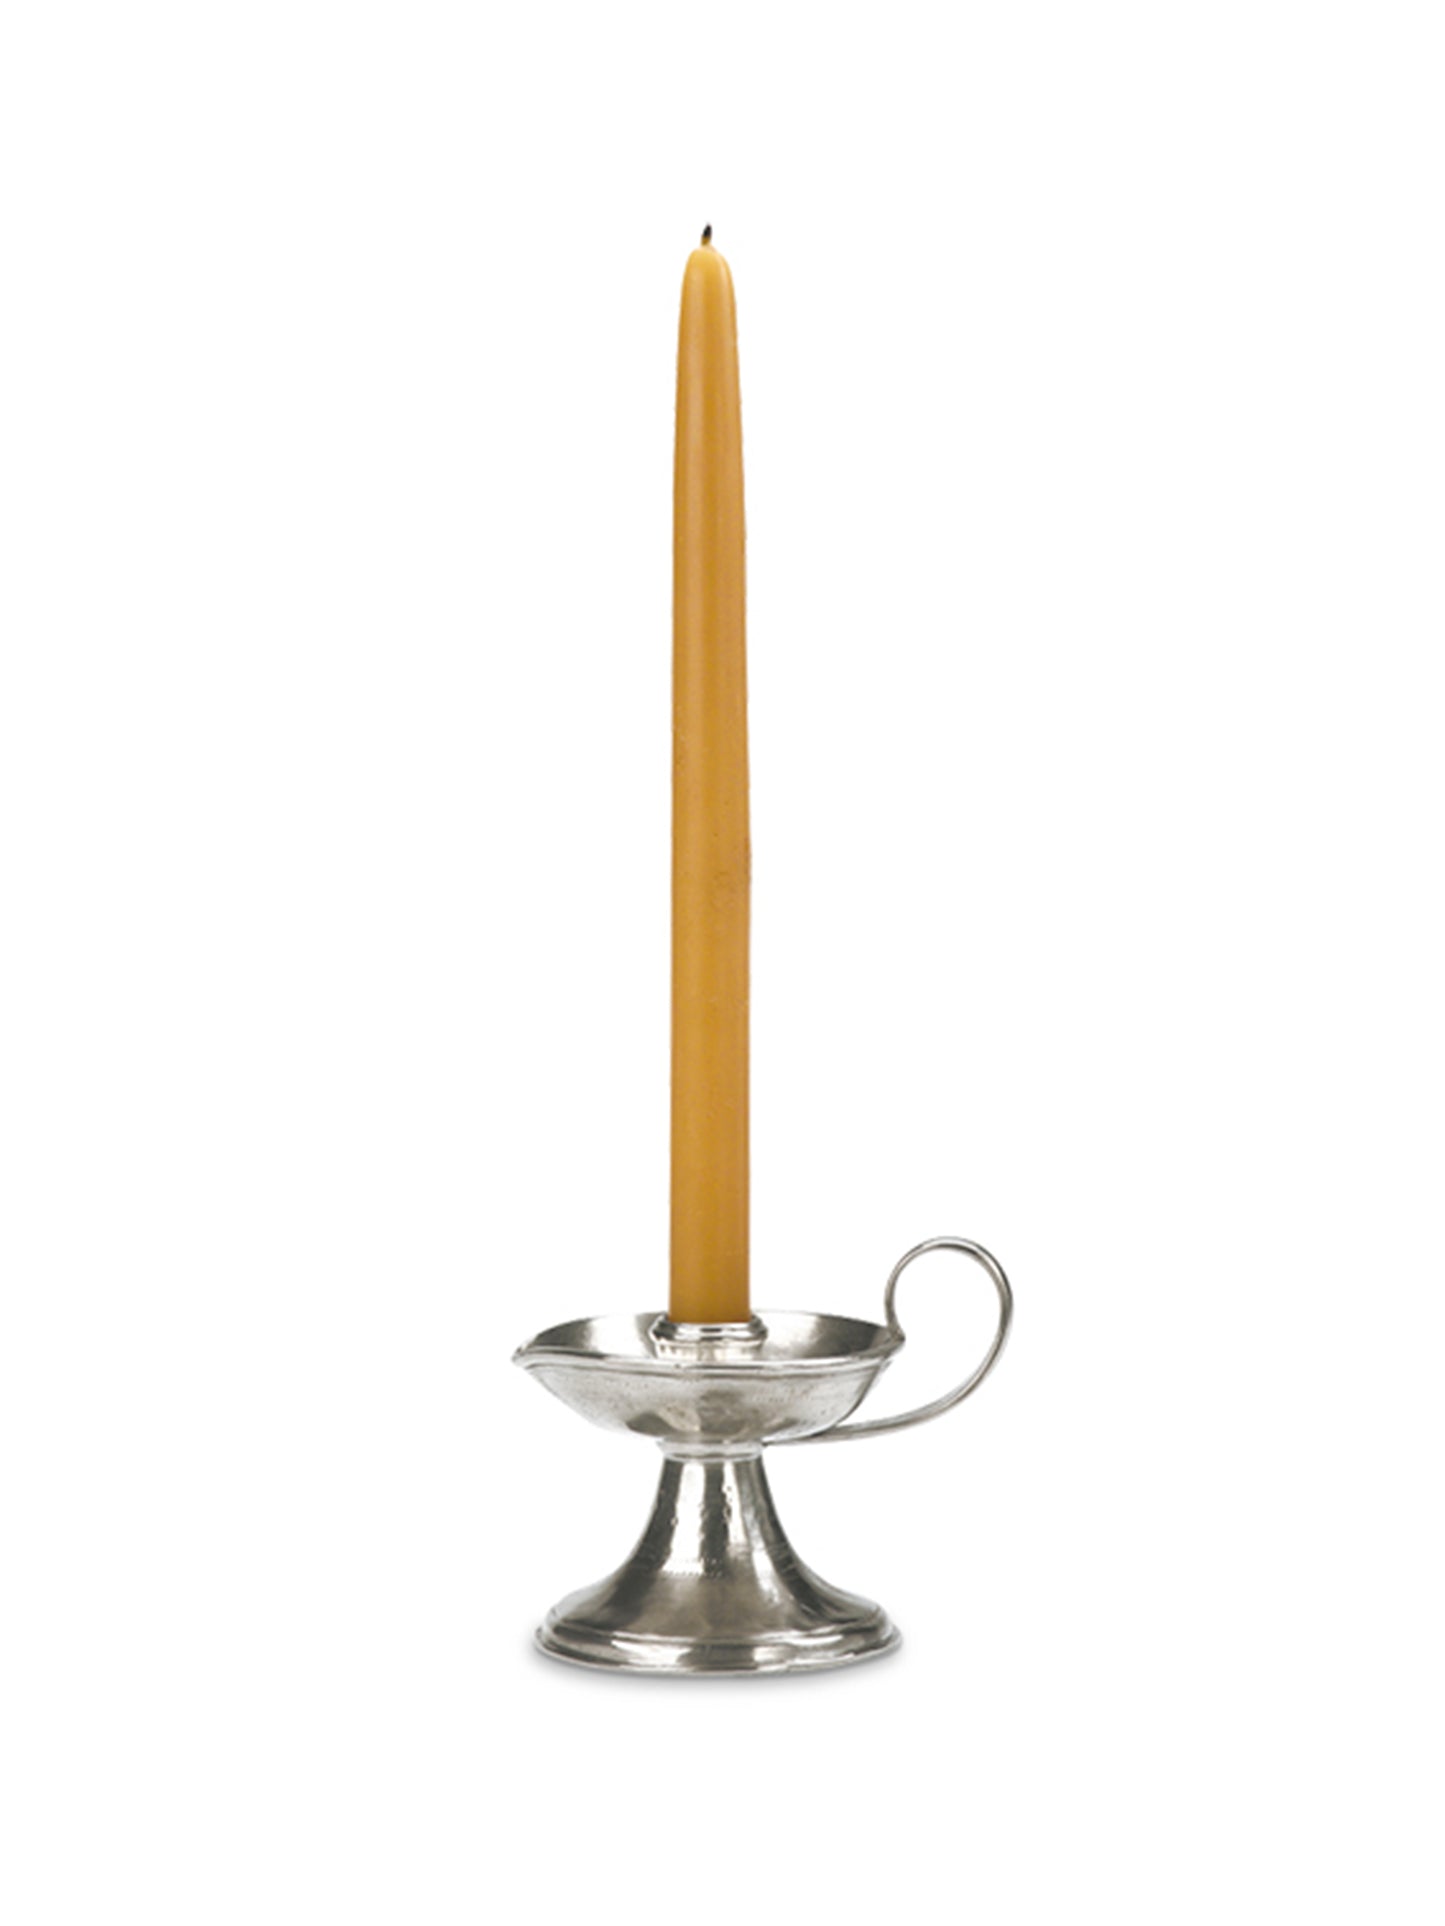 MATCH Pewter Bedside Candlestick Weston Table